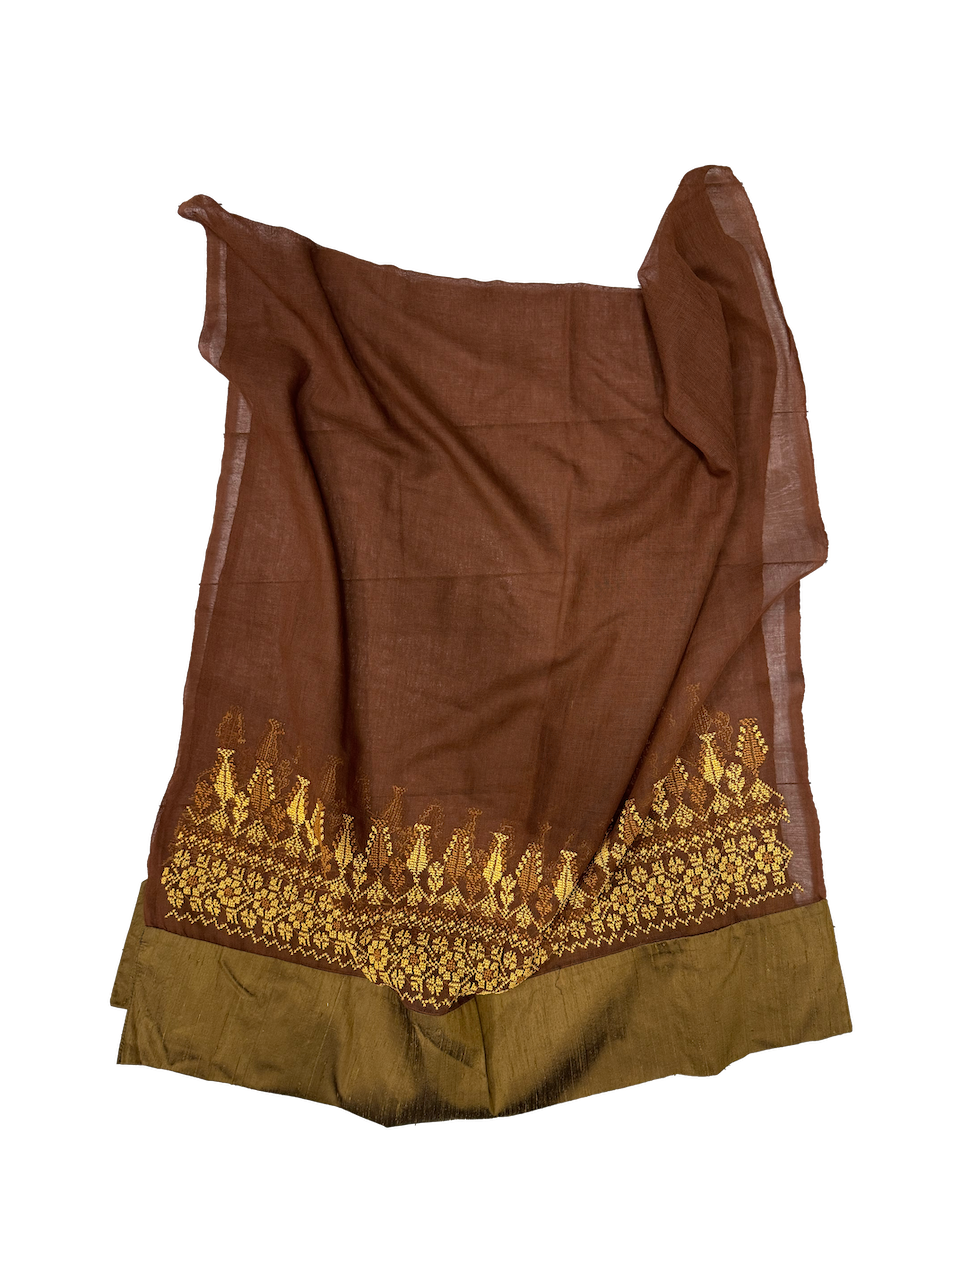 The Embroidered Najaf Scarf in Light Brown